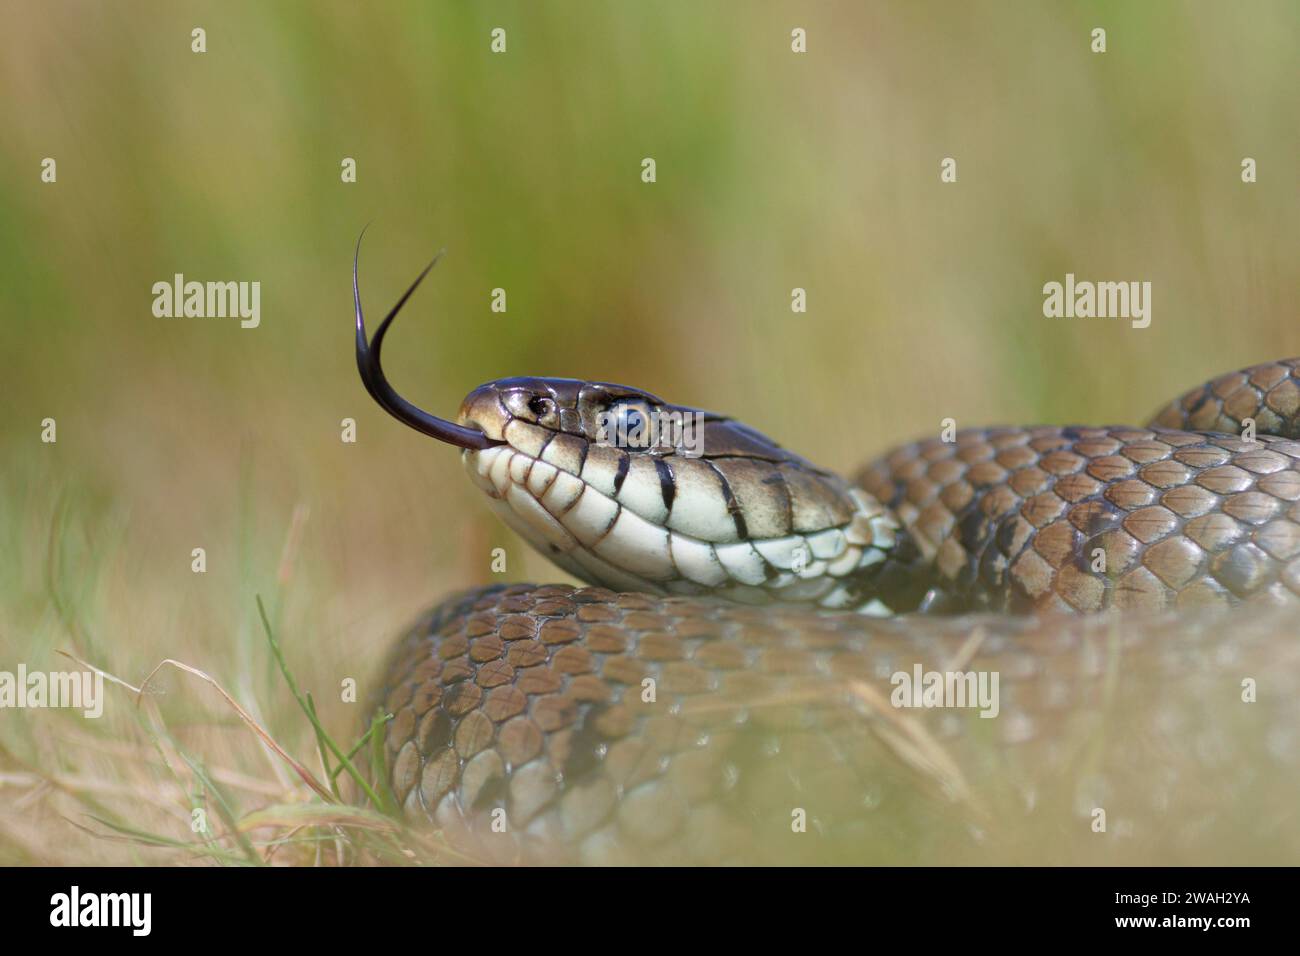 barred grass snake (Natrix natrix helvetica, Natrix helvetica), darting its tongue in and out, portrait, France, Le Mans Stock Photo